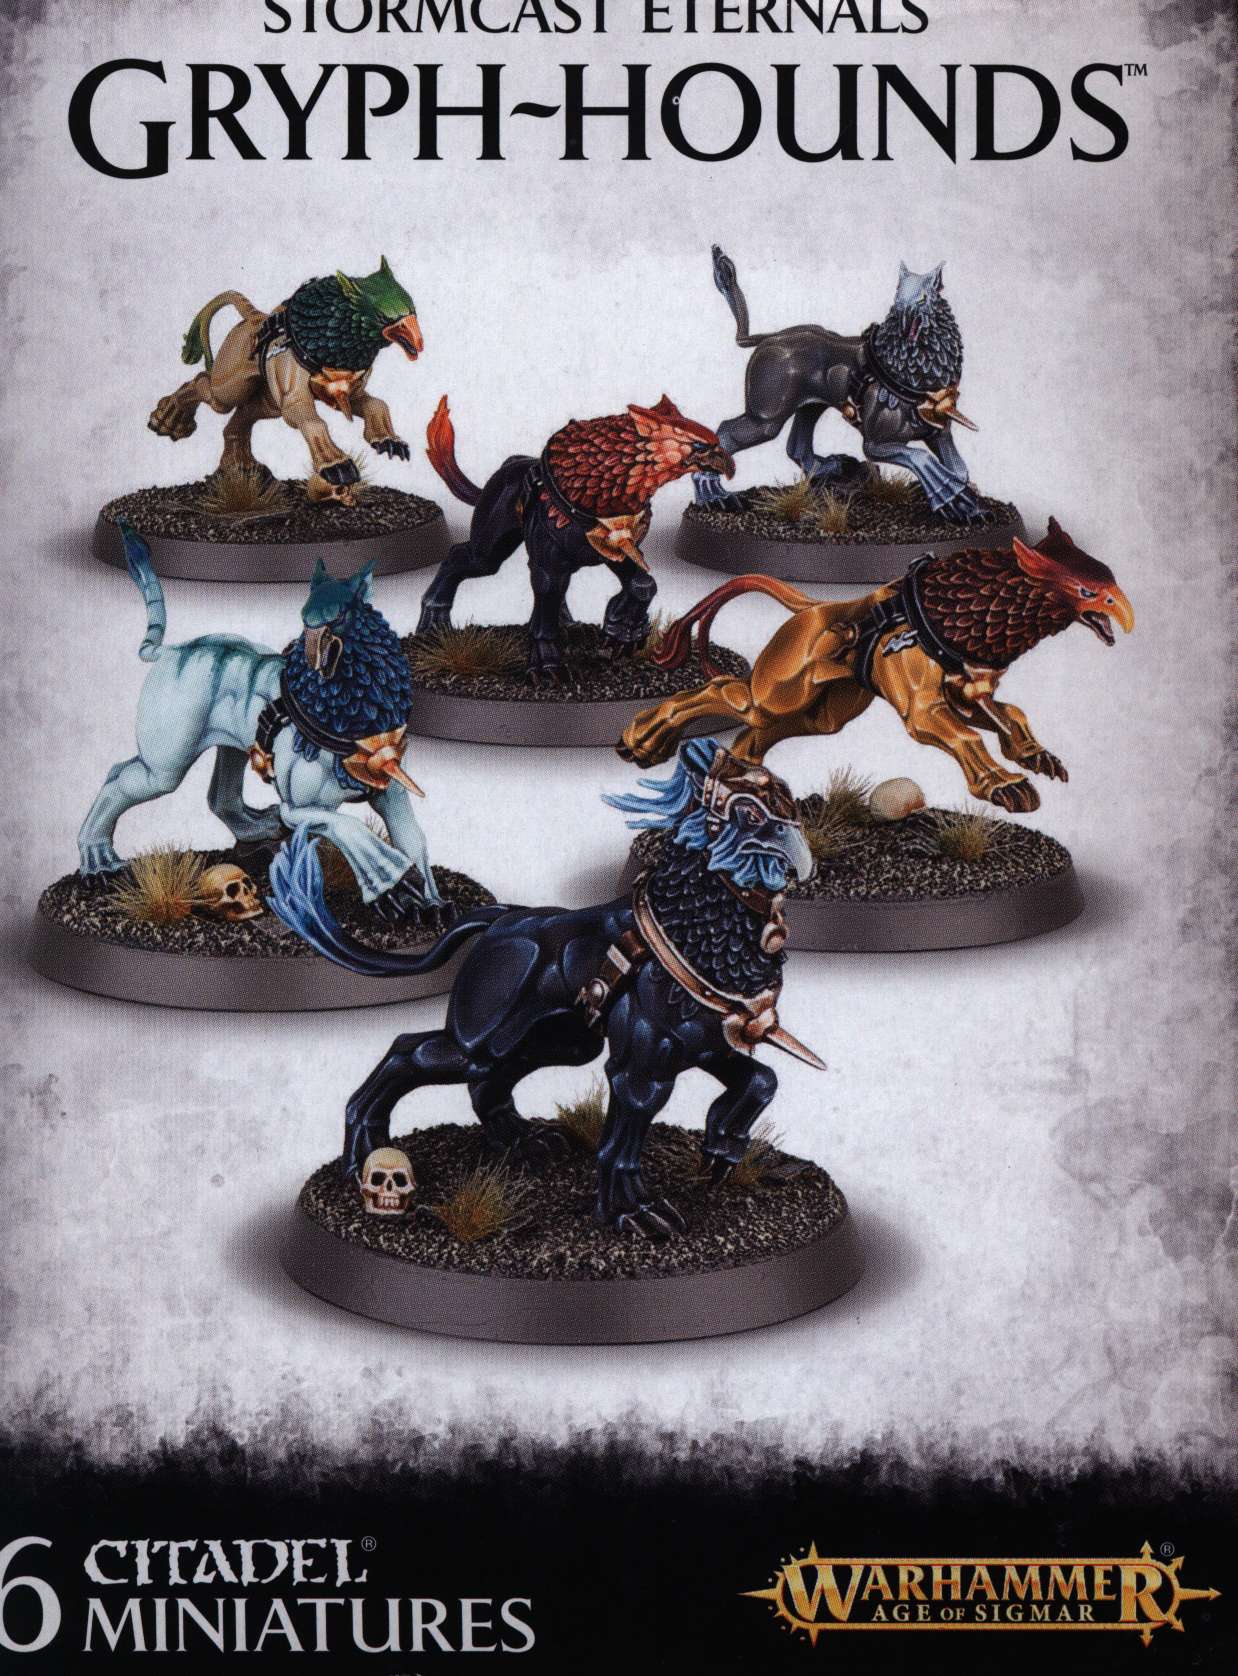 3 Gryph-hounds Warhammer Age of Sigmar Stormcast Eternals AoS